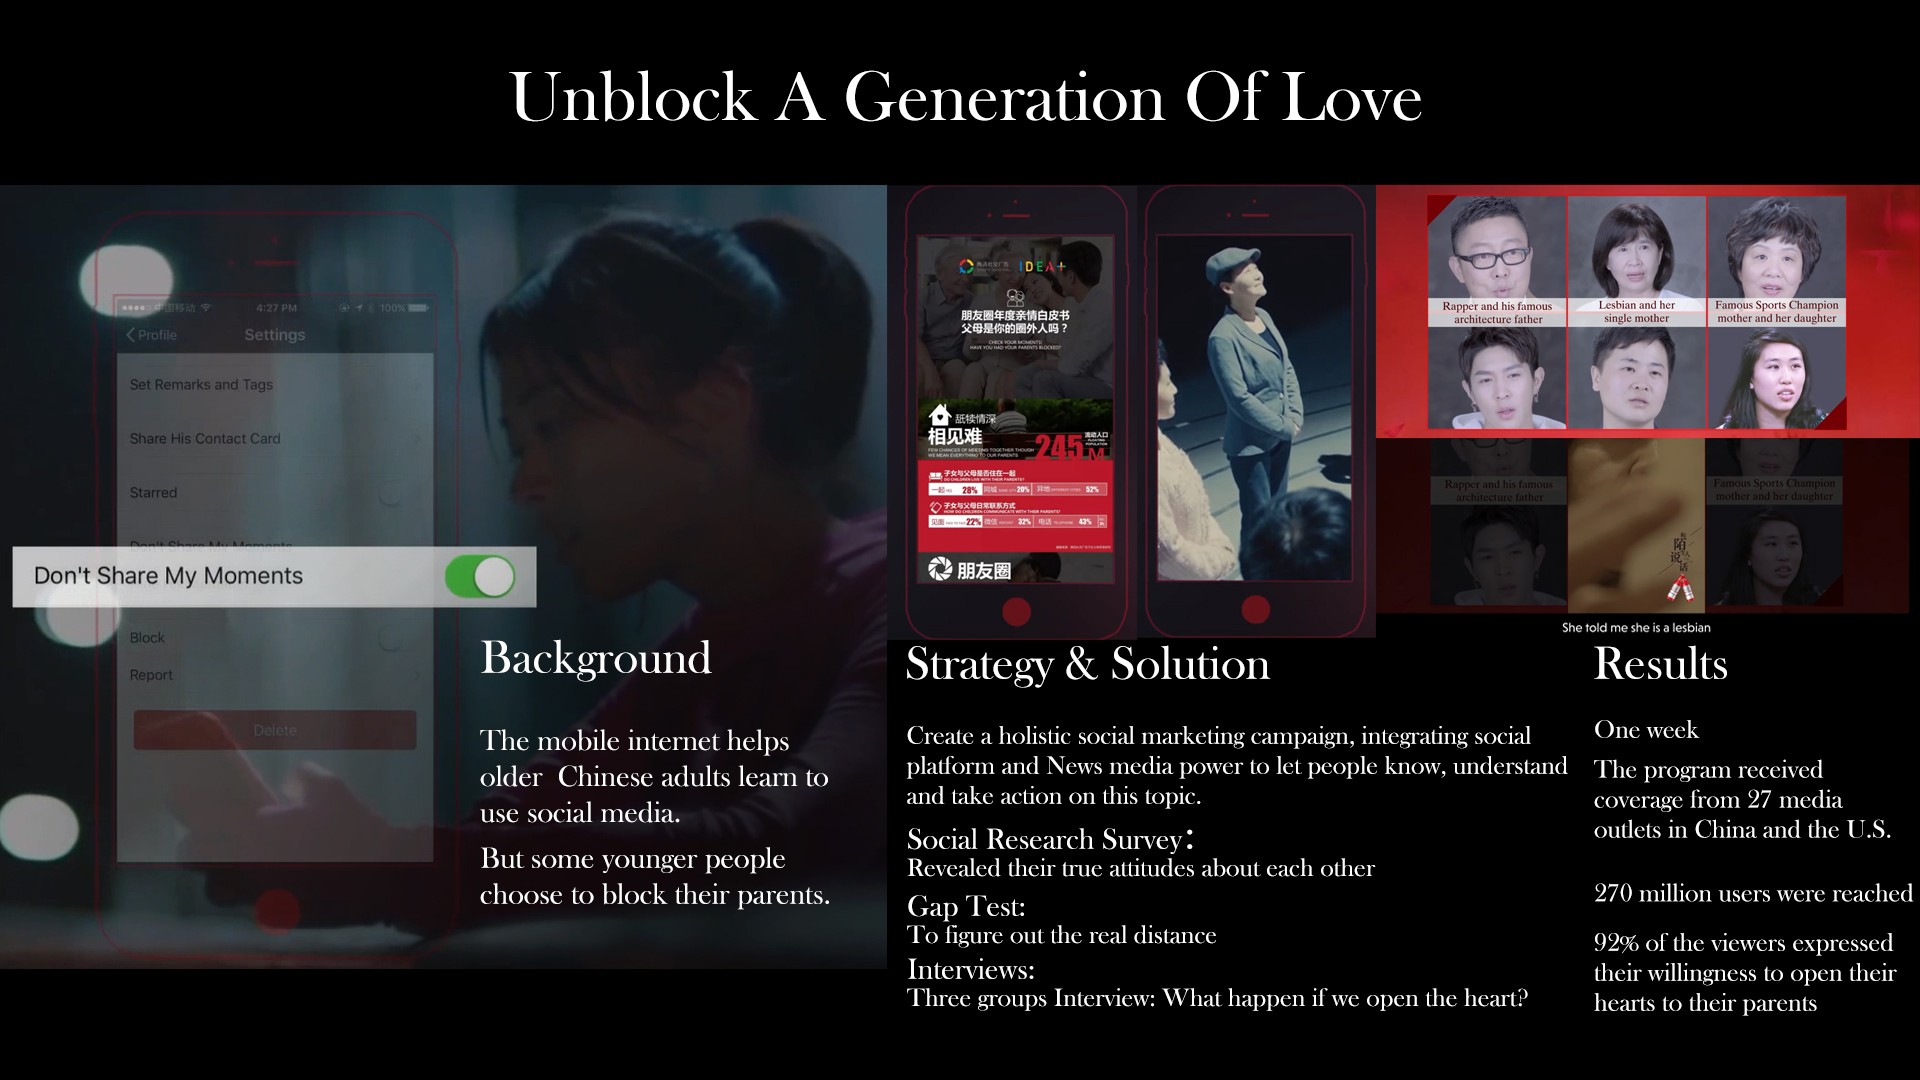 Unblock A Generation of Love